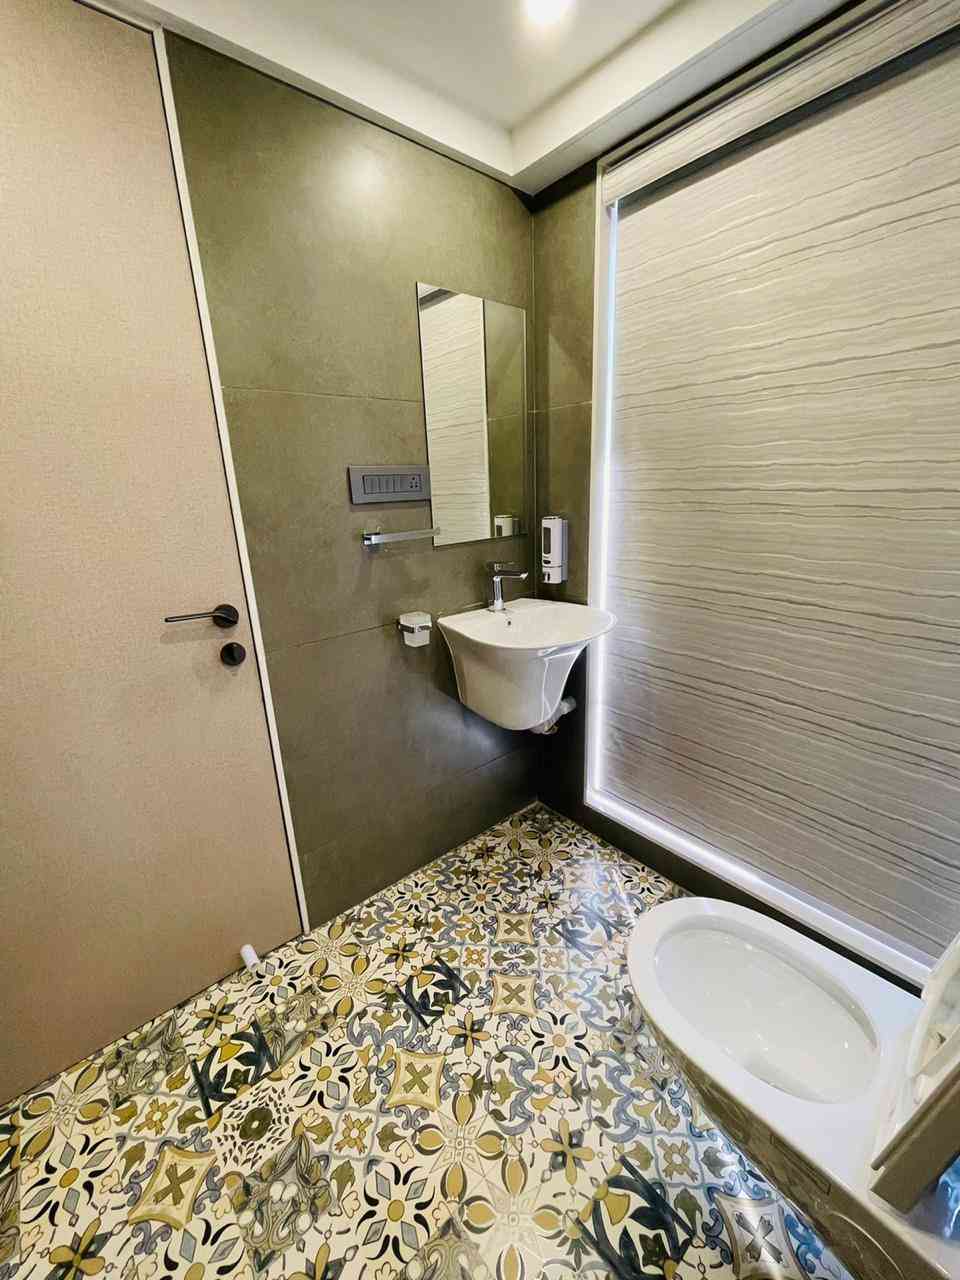 Bathroom Design With Colorful Floor Tiles